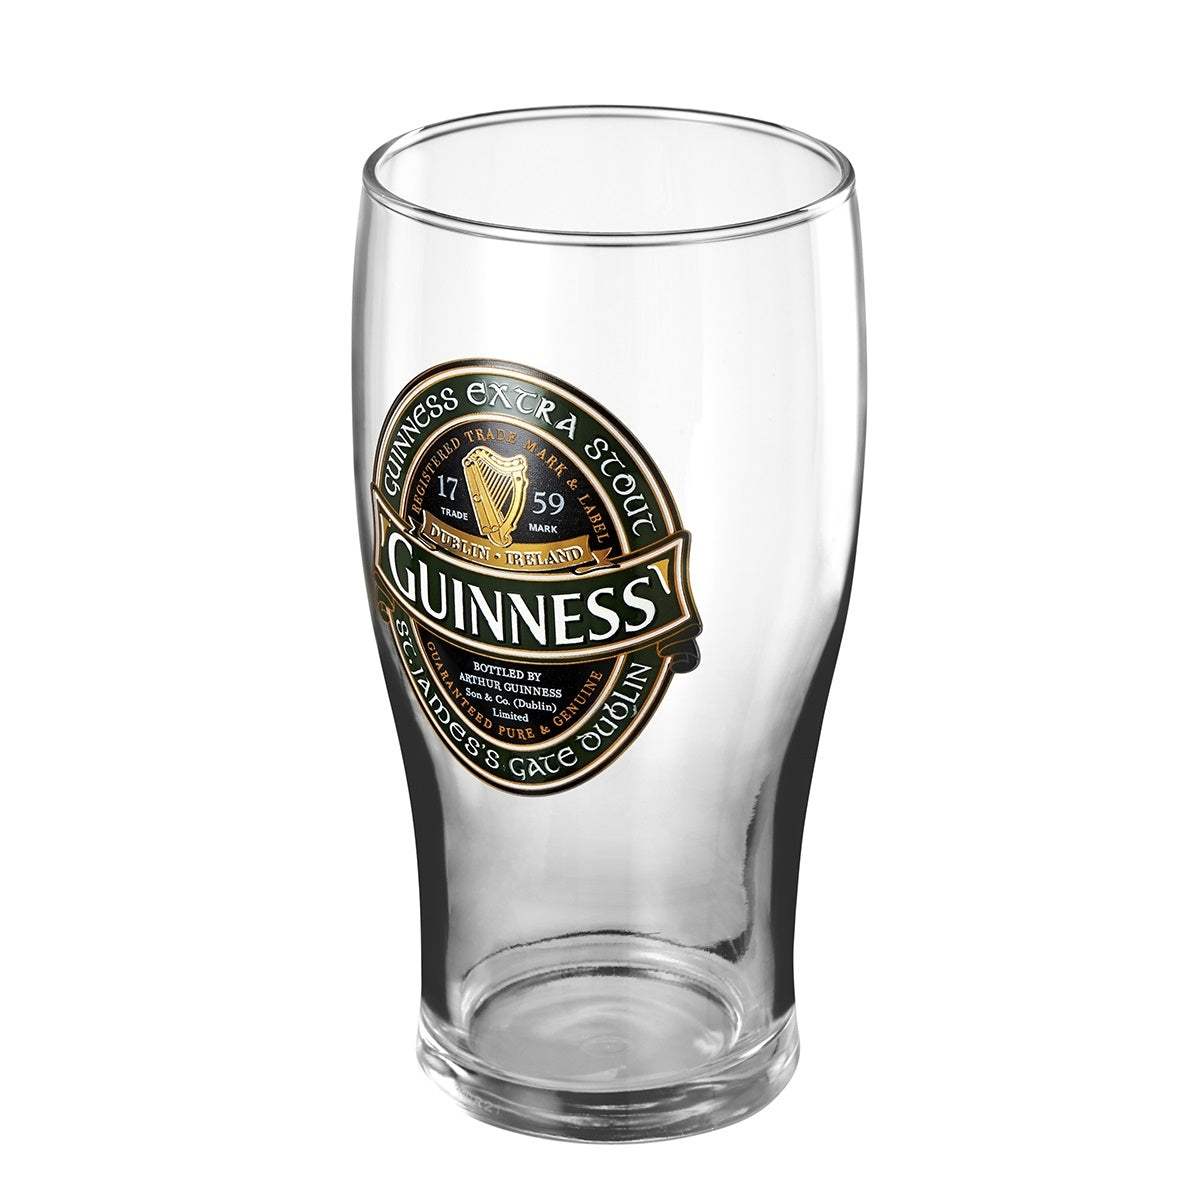 Guinness Ireland Collection Pint Glass 12 Pack